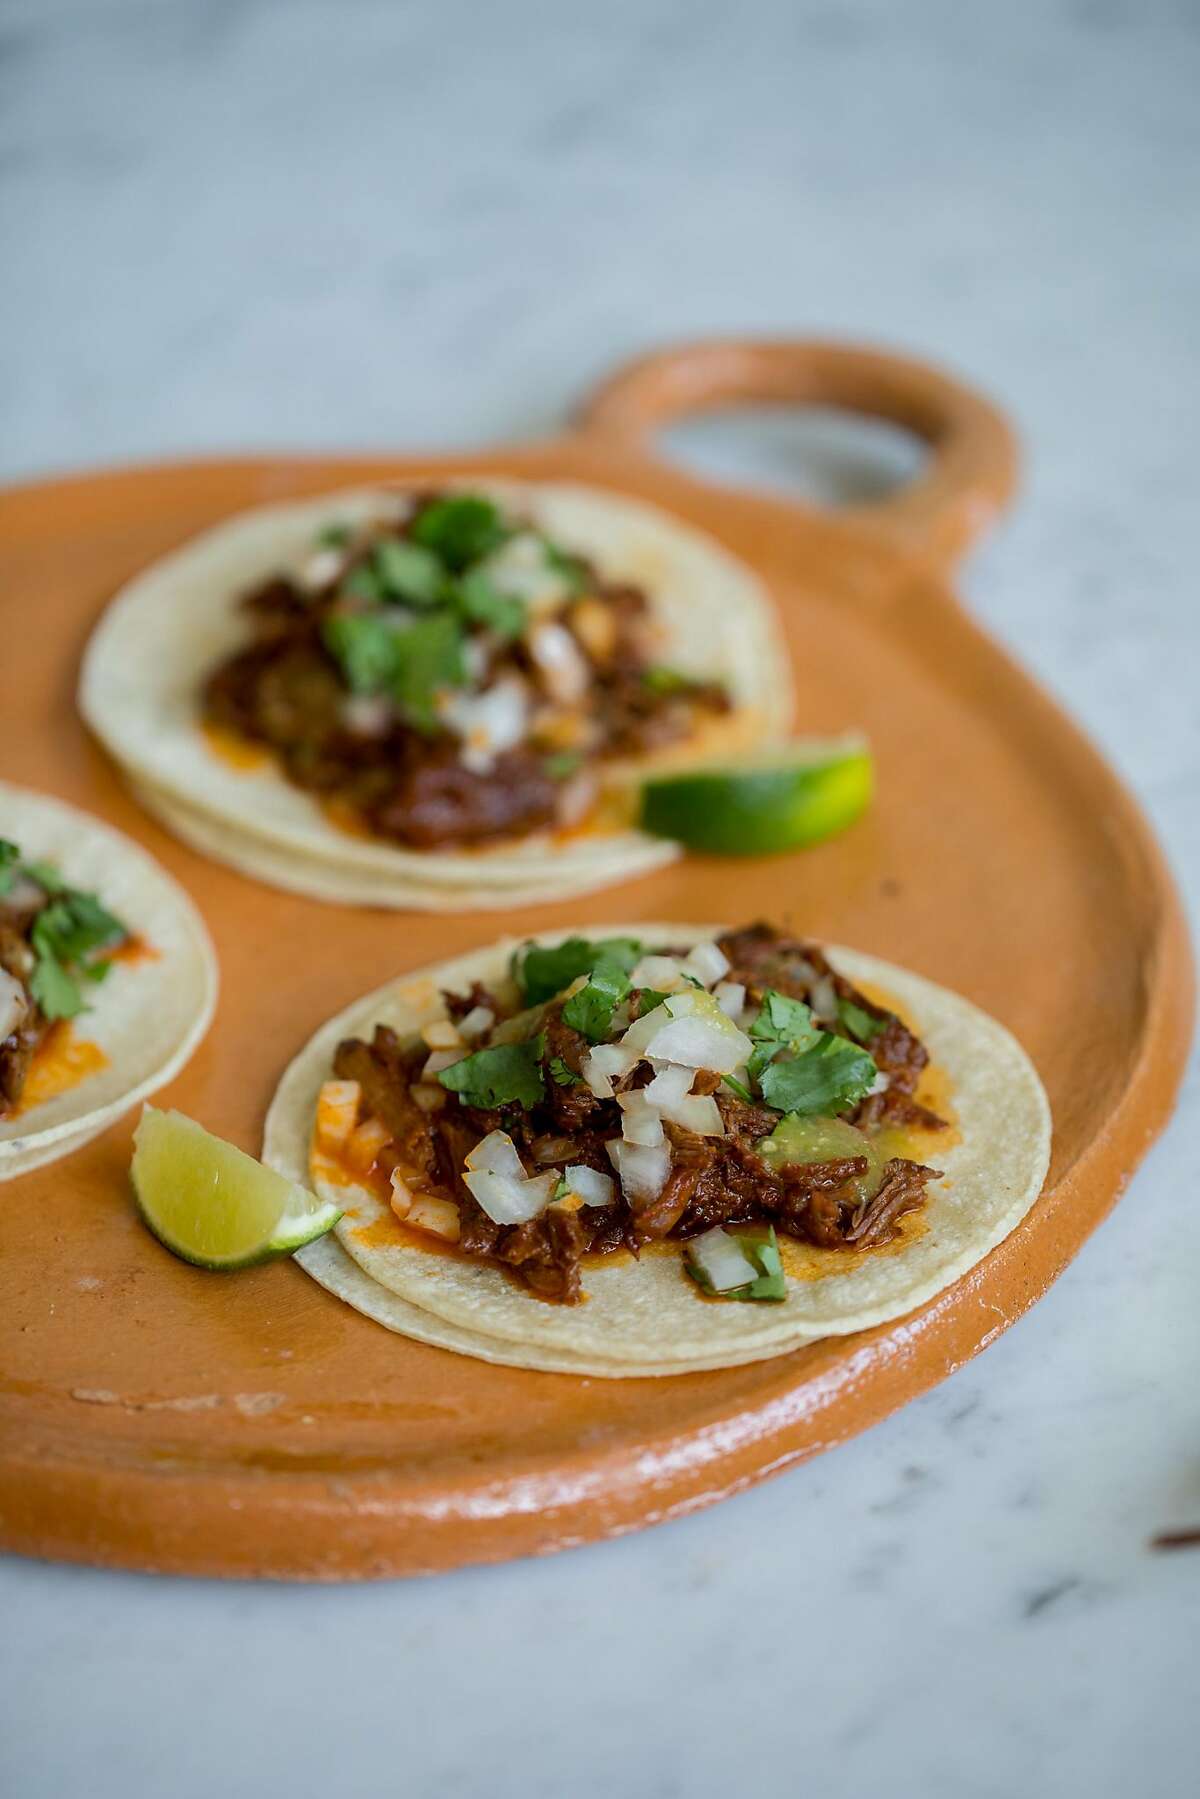 Barbacoa tacos made by chef Ofelia Barajas of La Guerreras Kitchen, a takeout window in Oakland’s Fruitvale District on September 9, 2019. Barajas opened her business in May 2019 with her daughter, Reyna Maldonado.